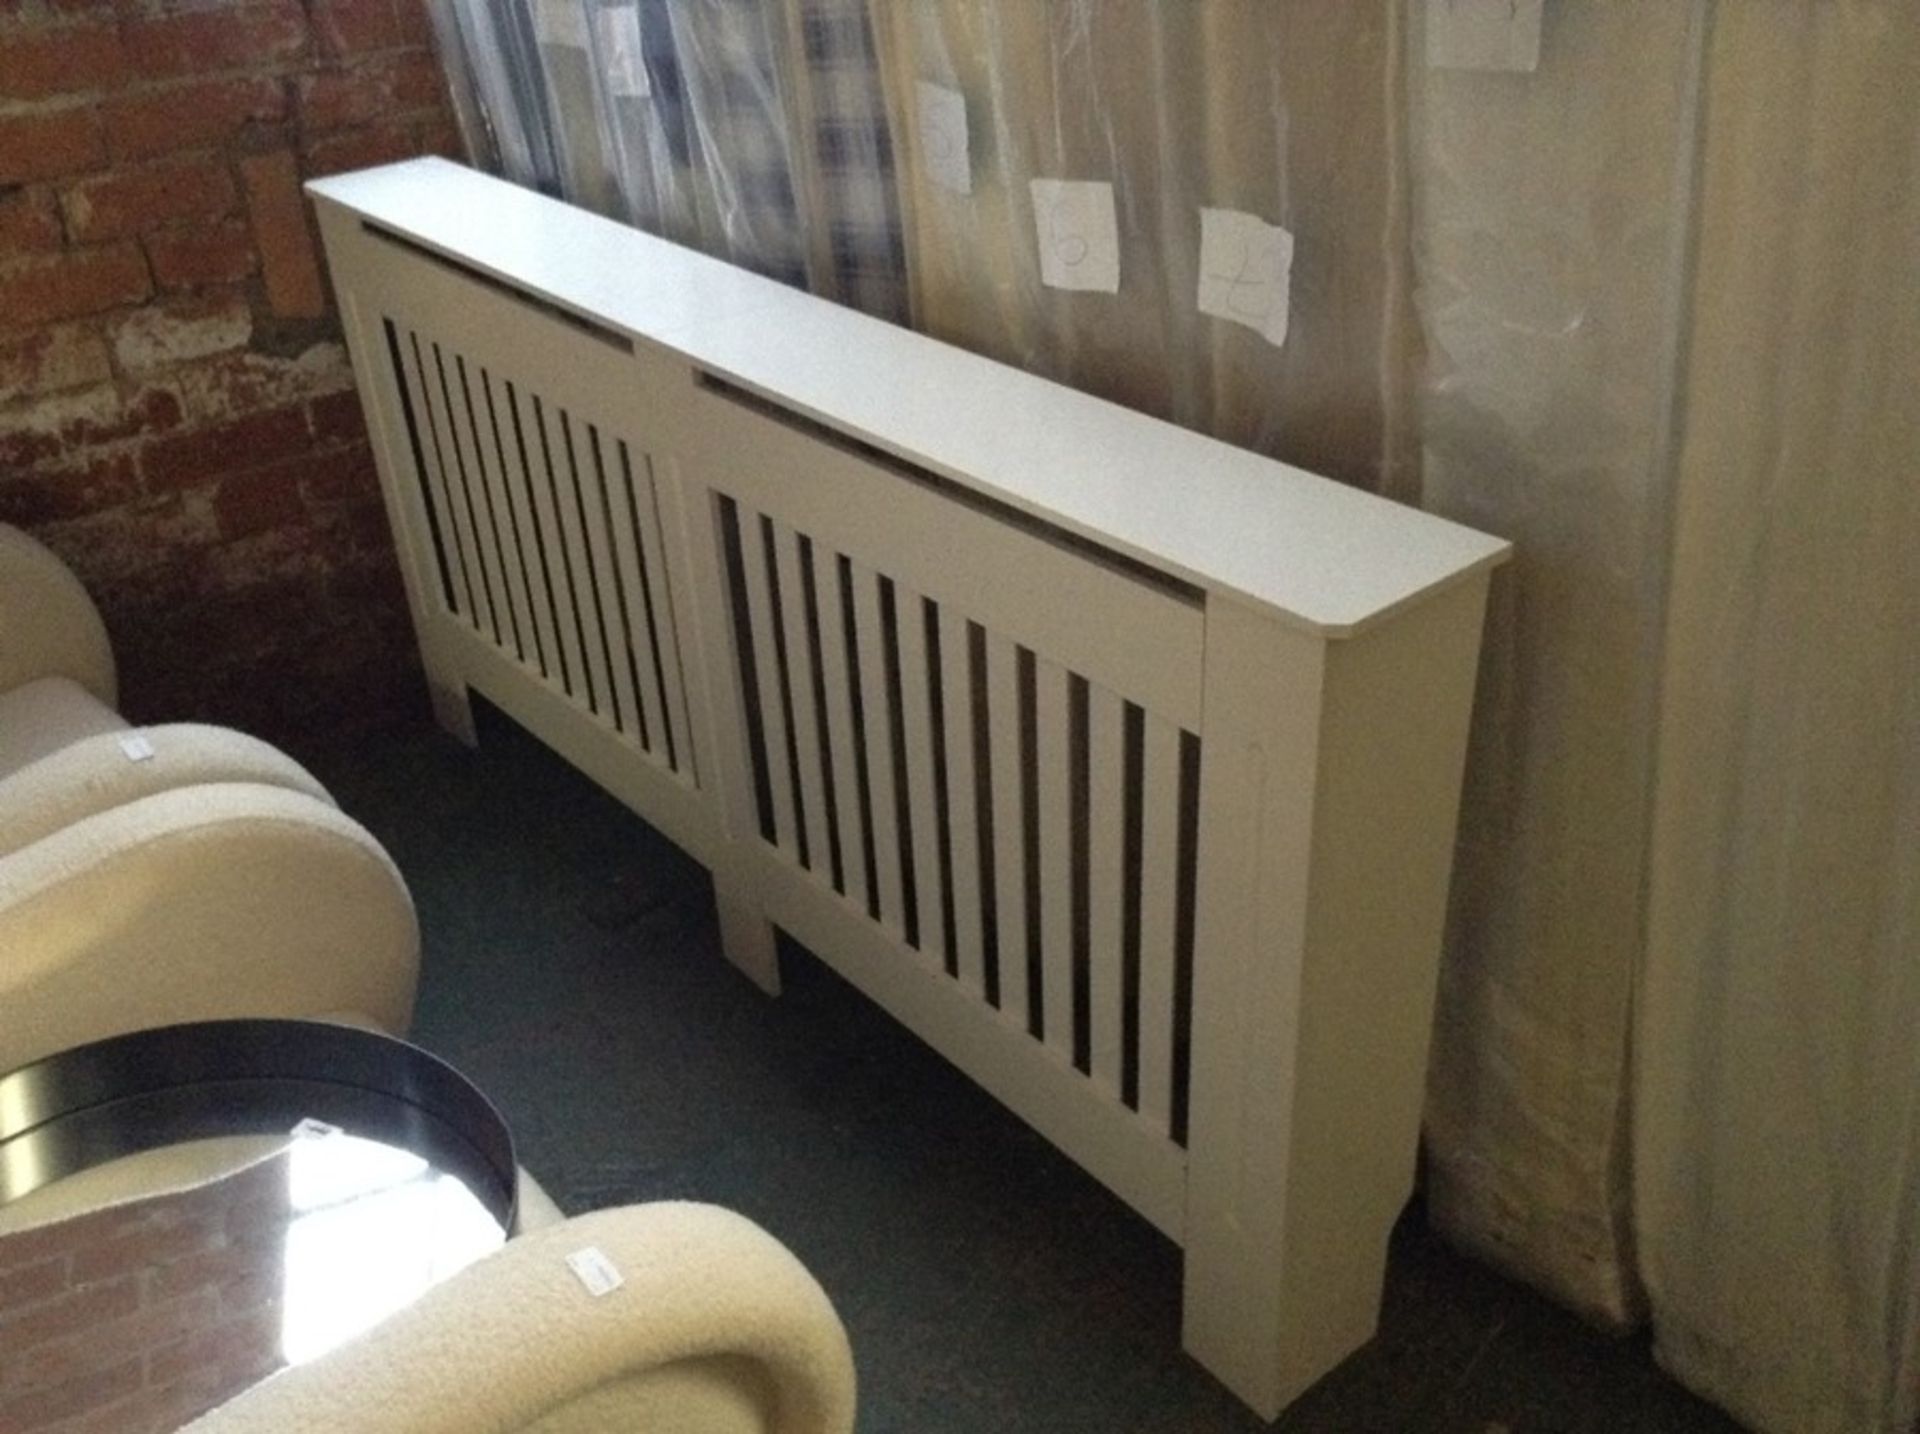 Belfry Heating,Veronica Extra Large Radiator Cover RRP£79.99(H17228 - 8/37 VDAX9358.46793874)